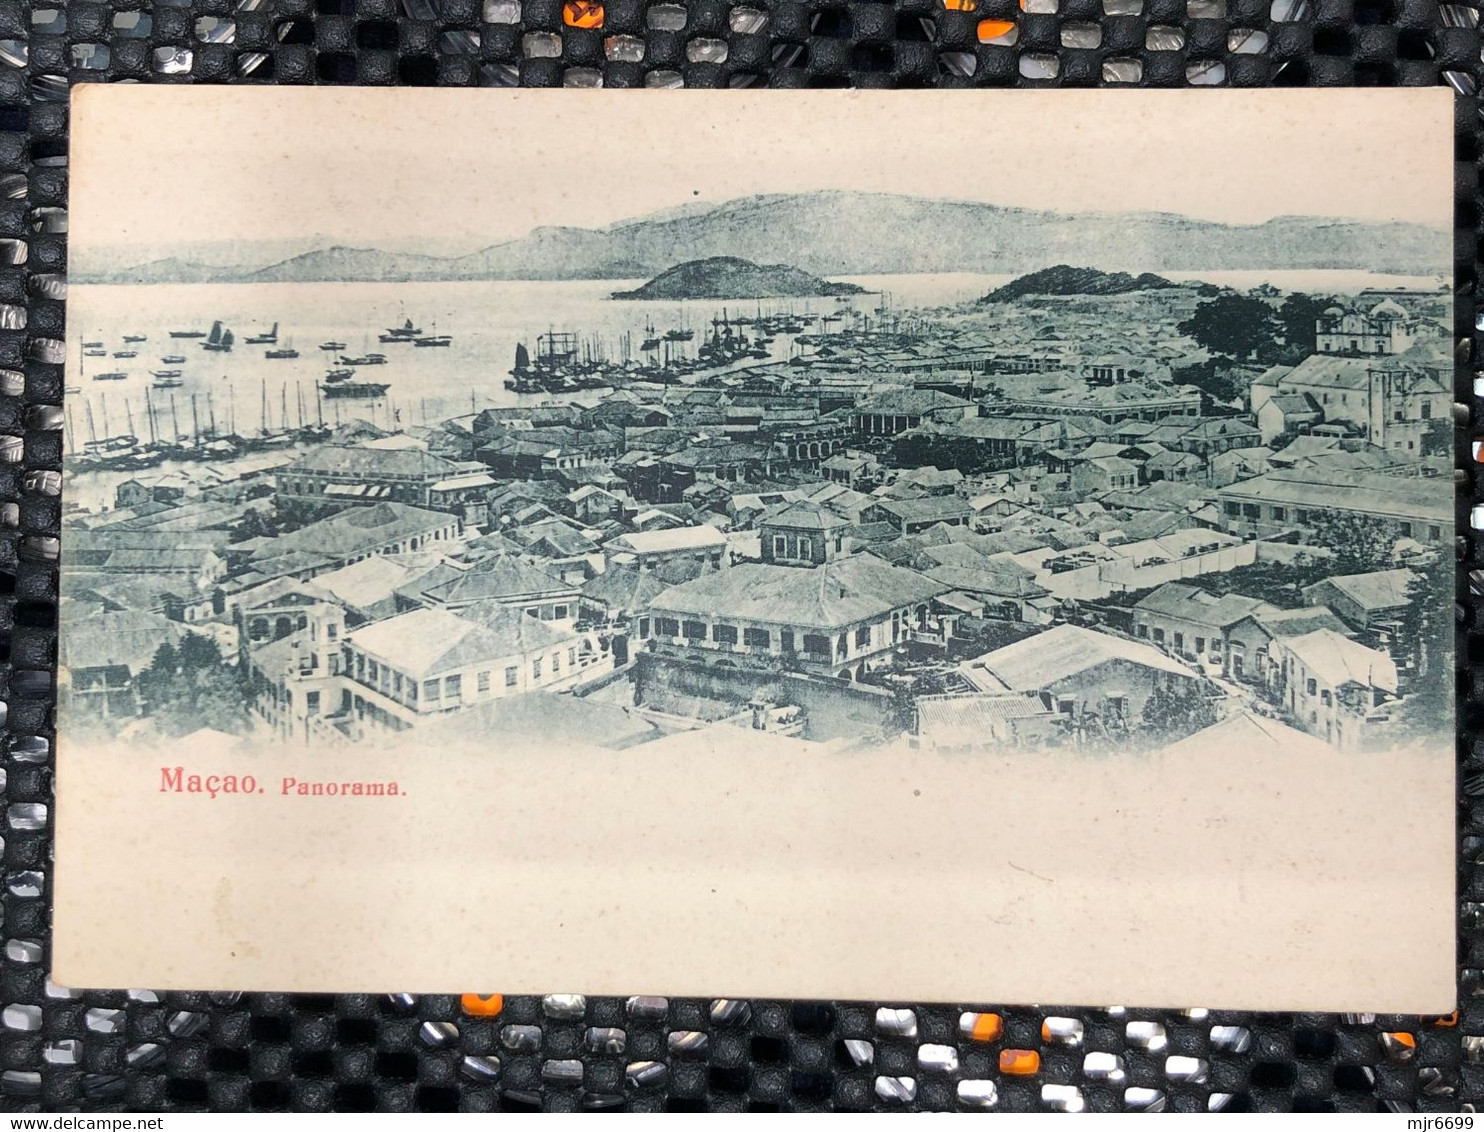 MACAU 1900'S PICTURE POST CARD WITH PANORAMA VIEW OF MACAU FROM THE BARRA HILL, ON BACK MOUNTAINS IS CHINA - Macao